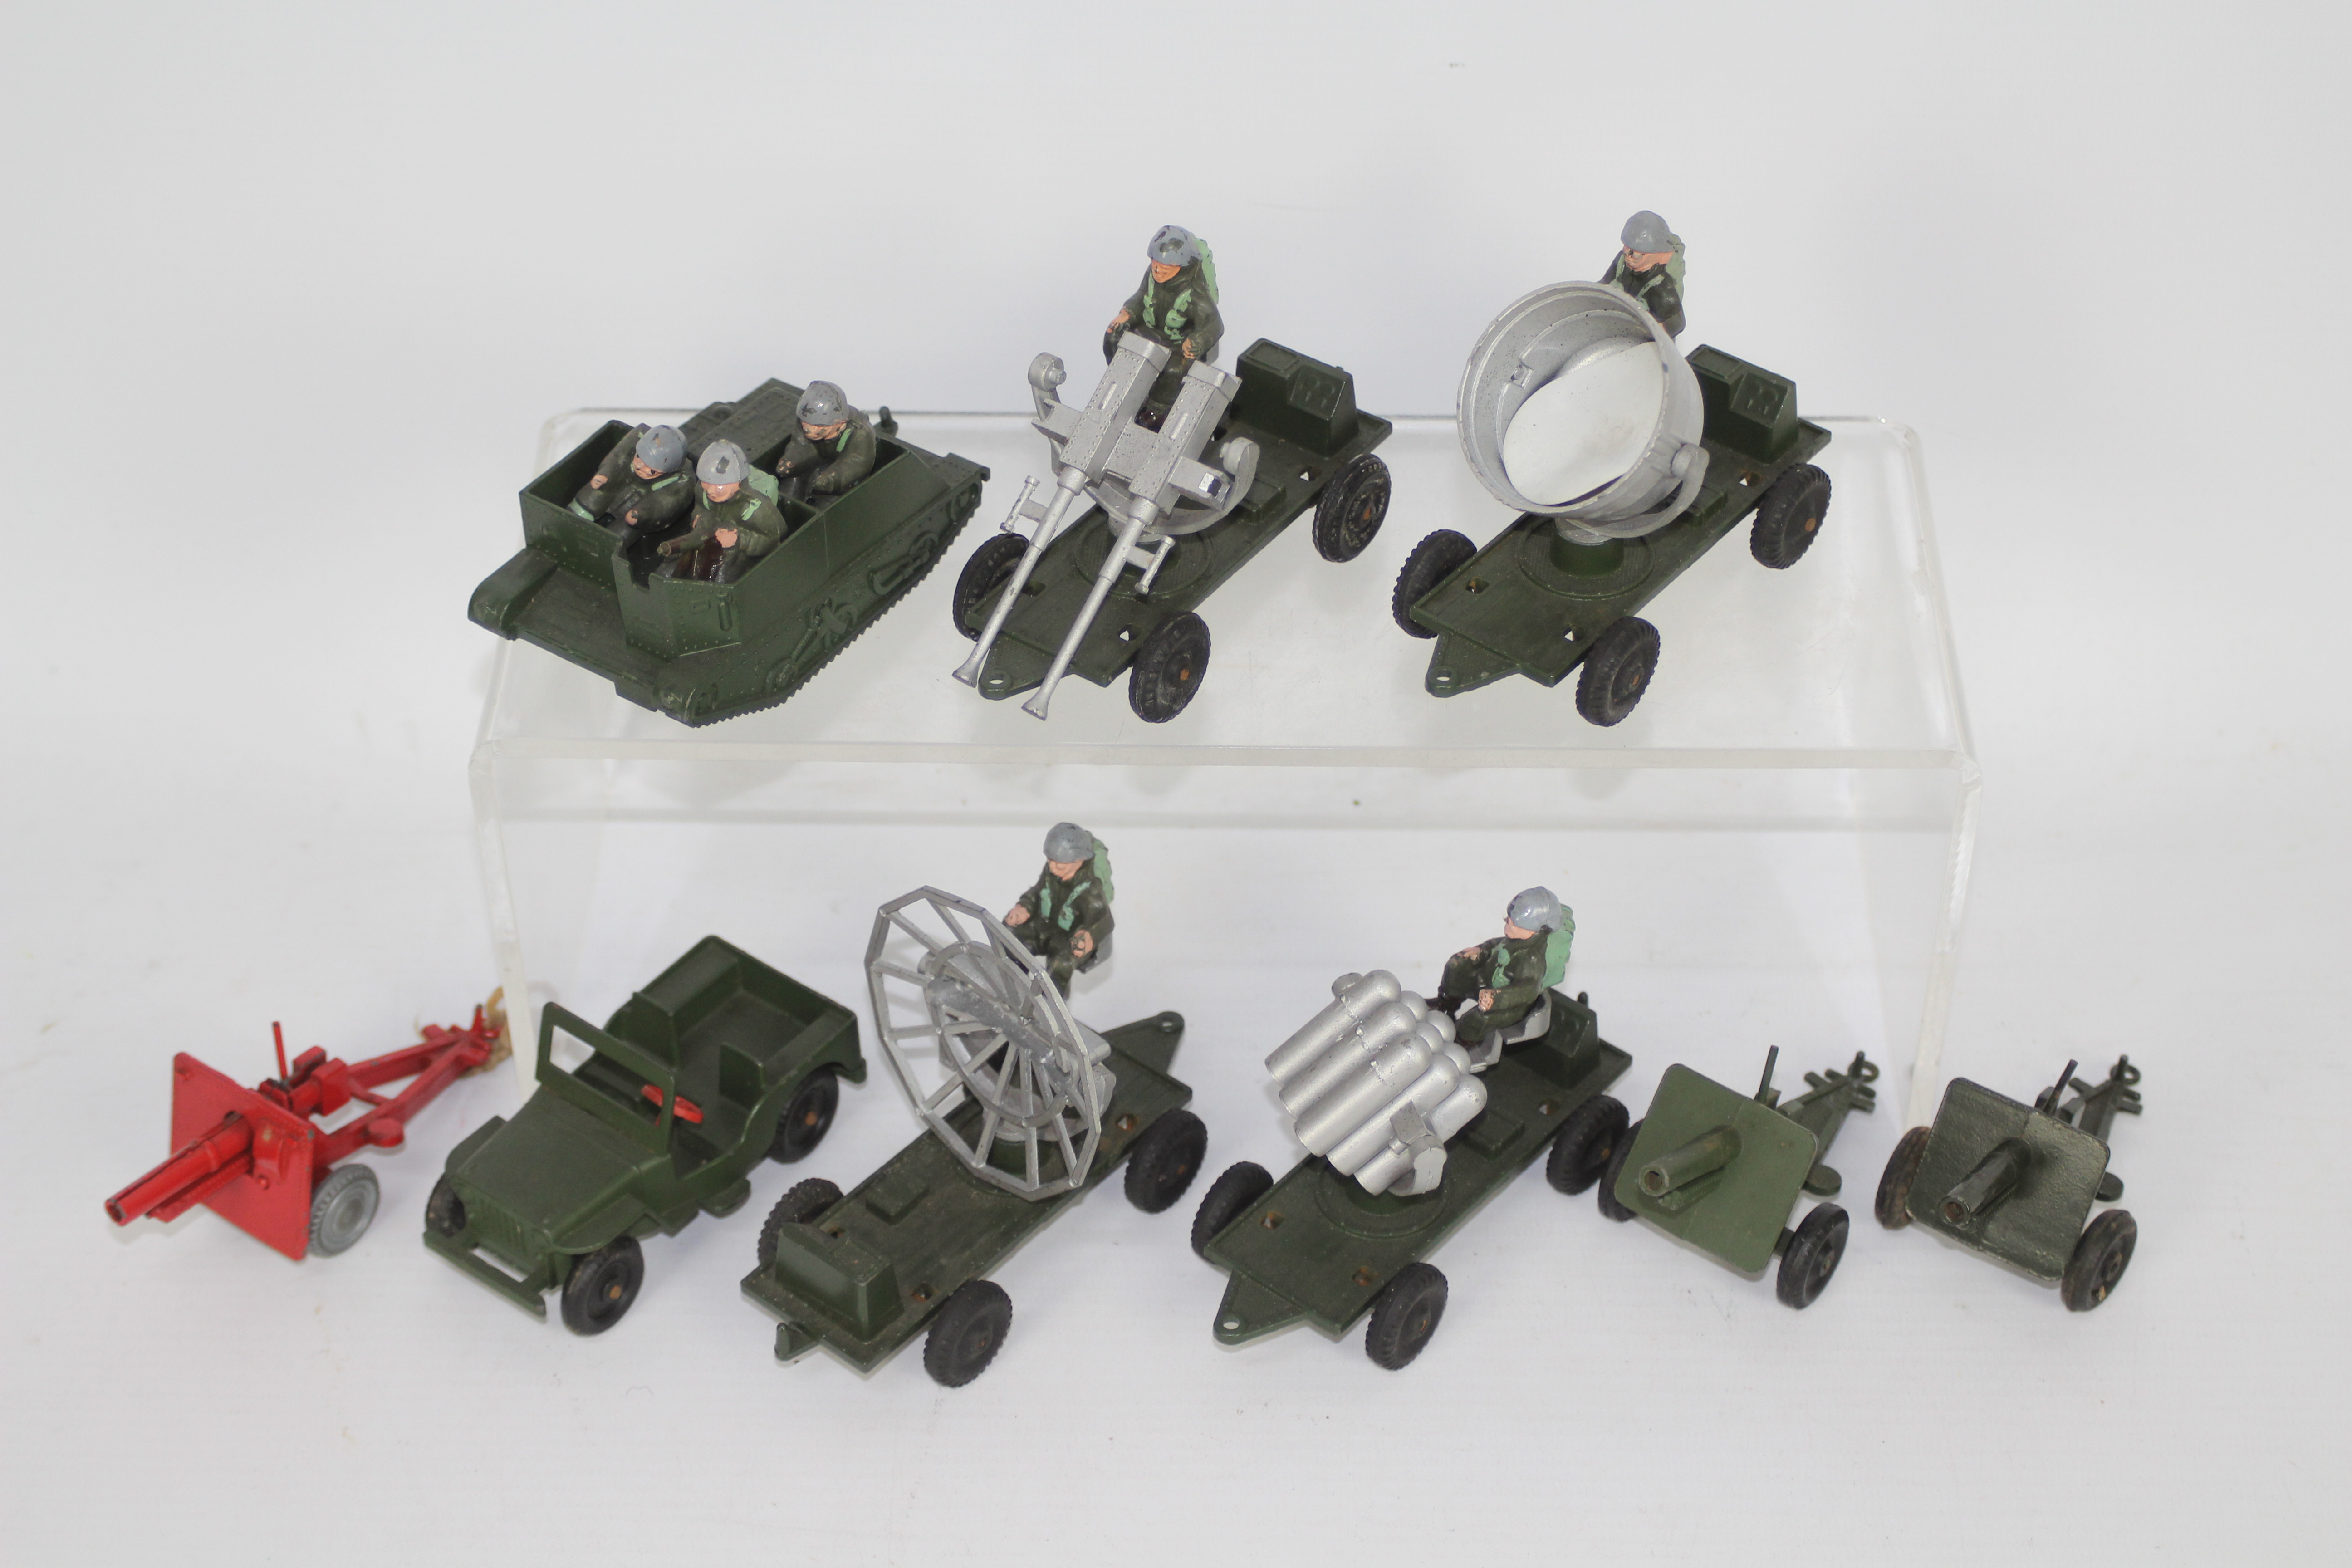 Lone Star - A collection of 9 x Military models including Bren Gun Carrier, 4 x trailers with guns,